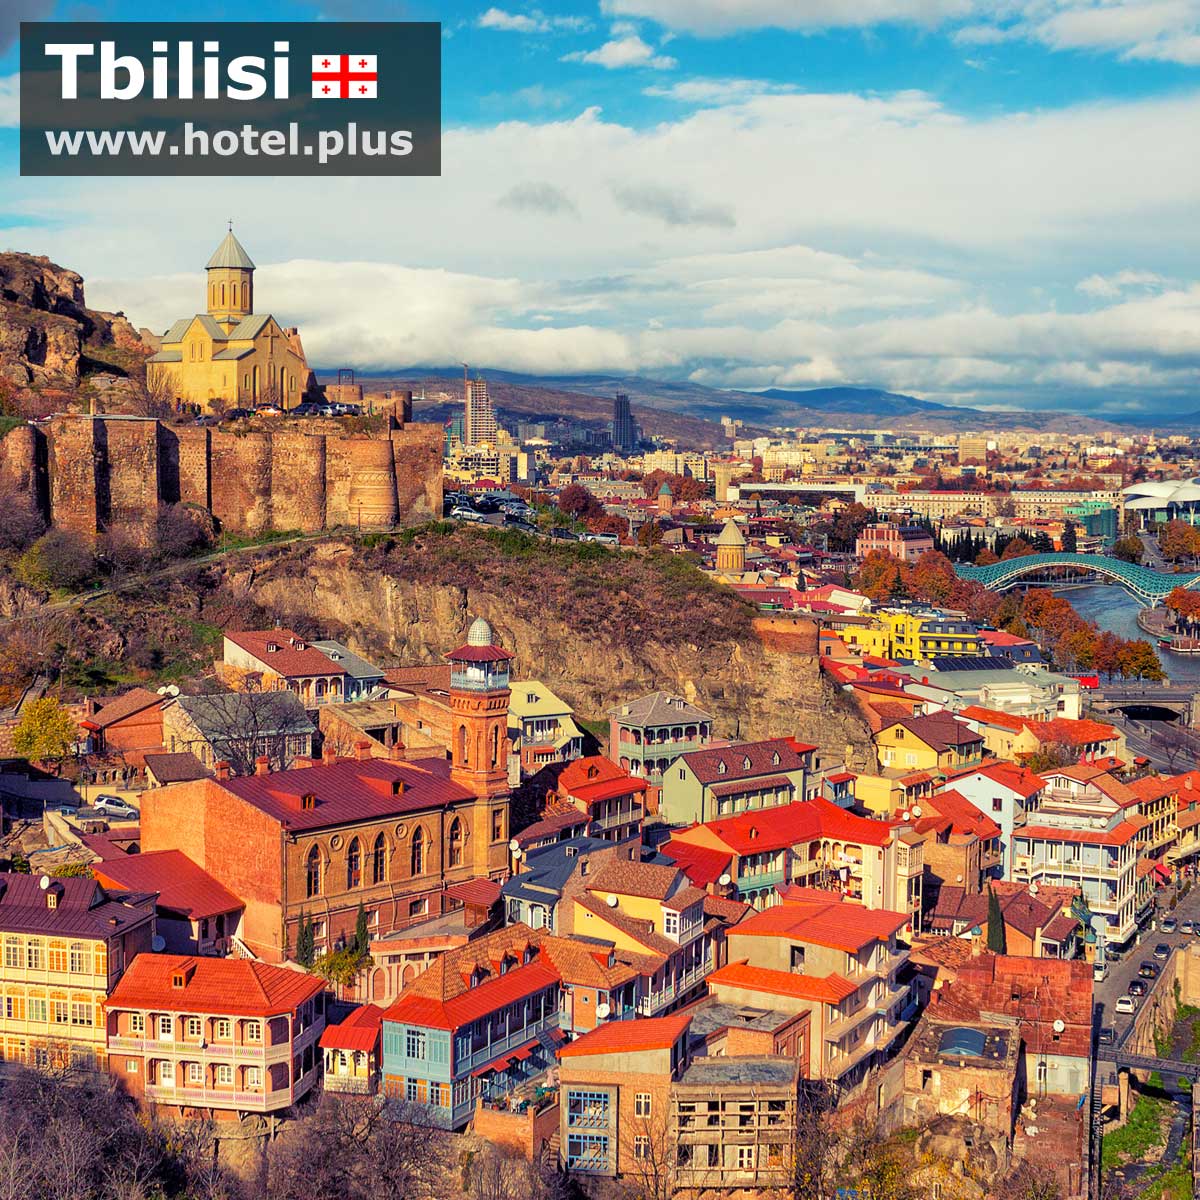 Hotels in Tbilisi